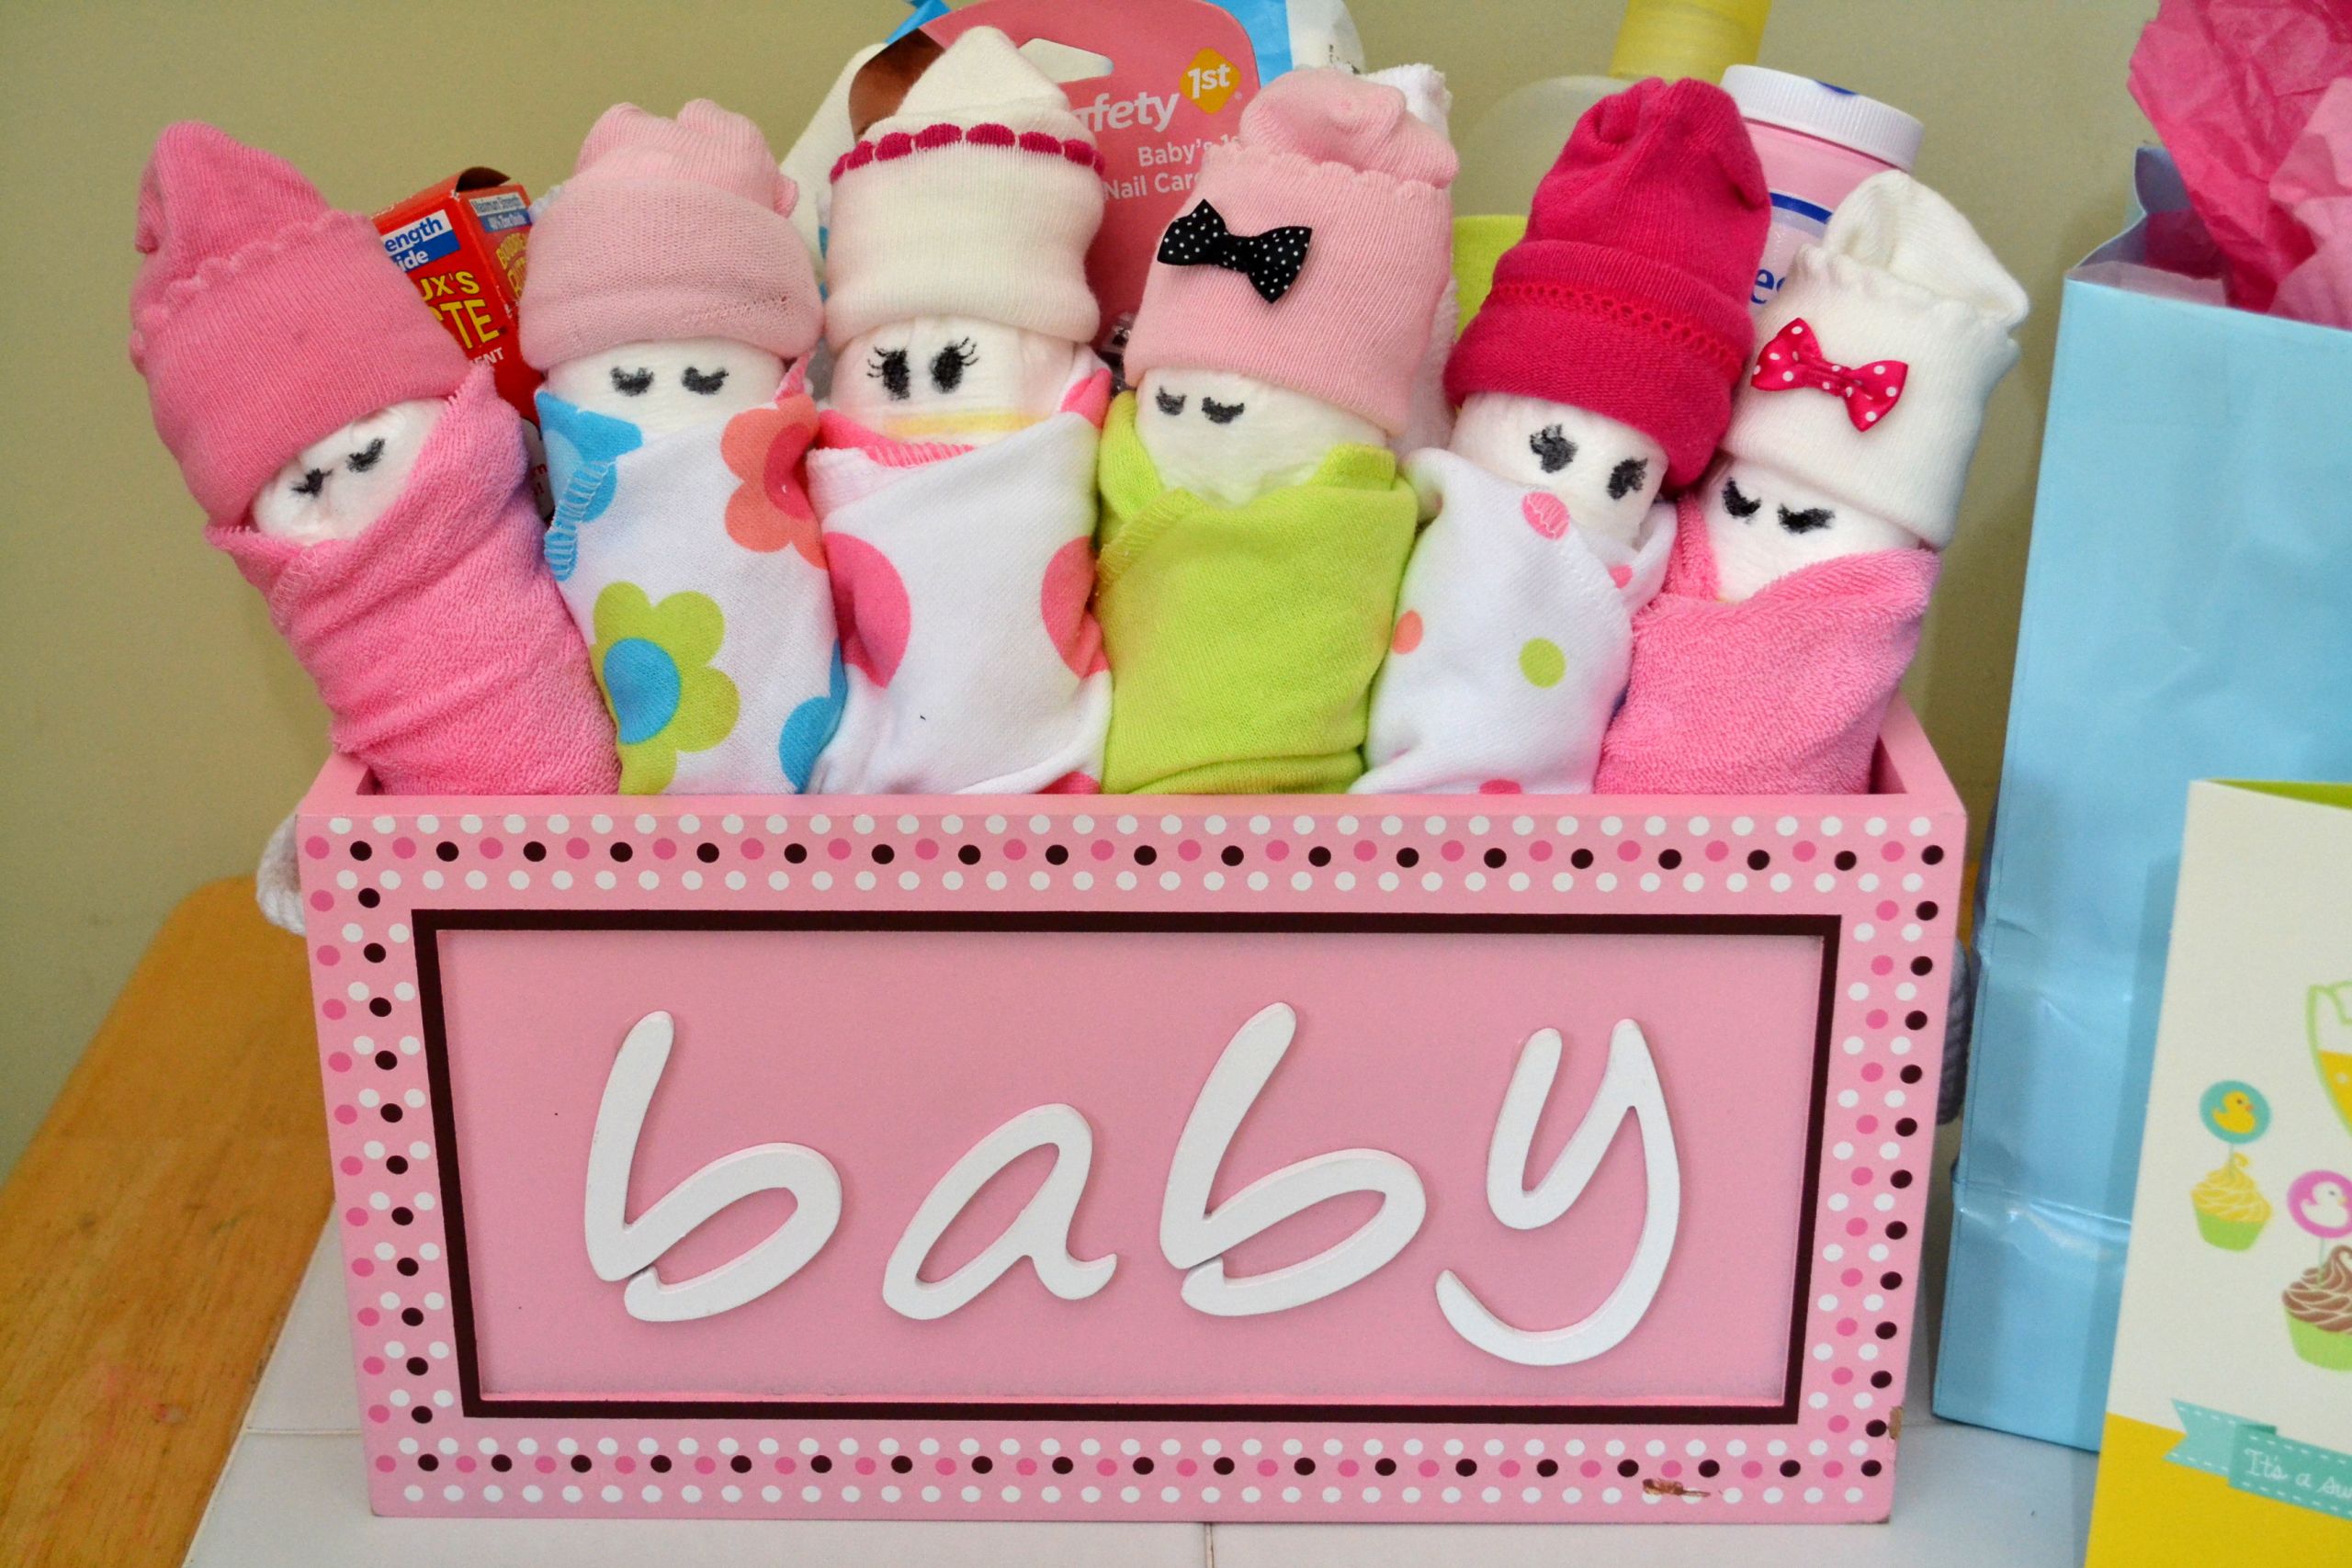 Baby Shower Homemade Gift Ideas
 Essential Baby Shower Gifts & DIY Diaper Babies